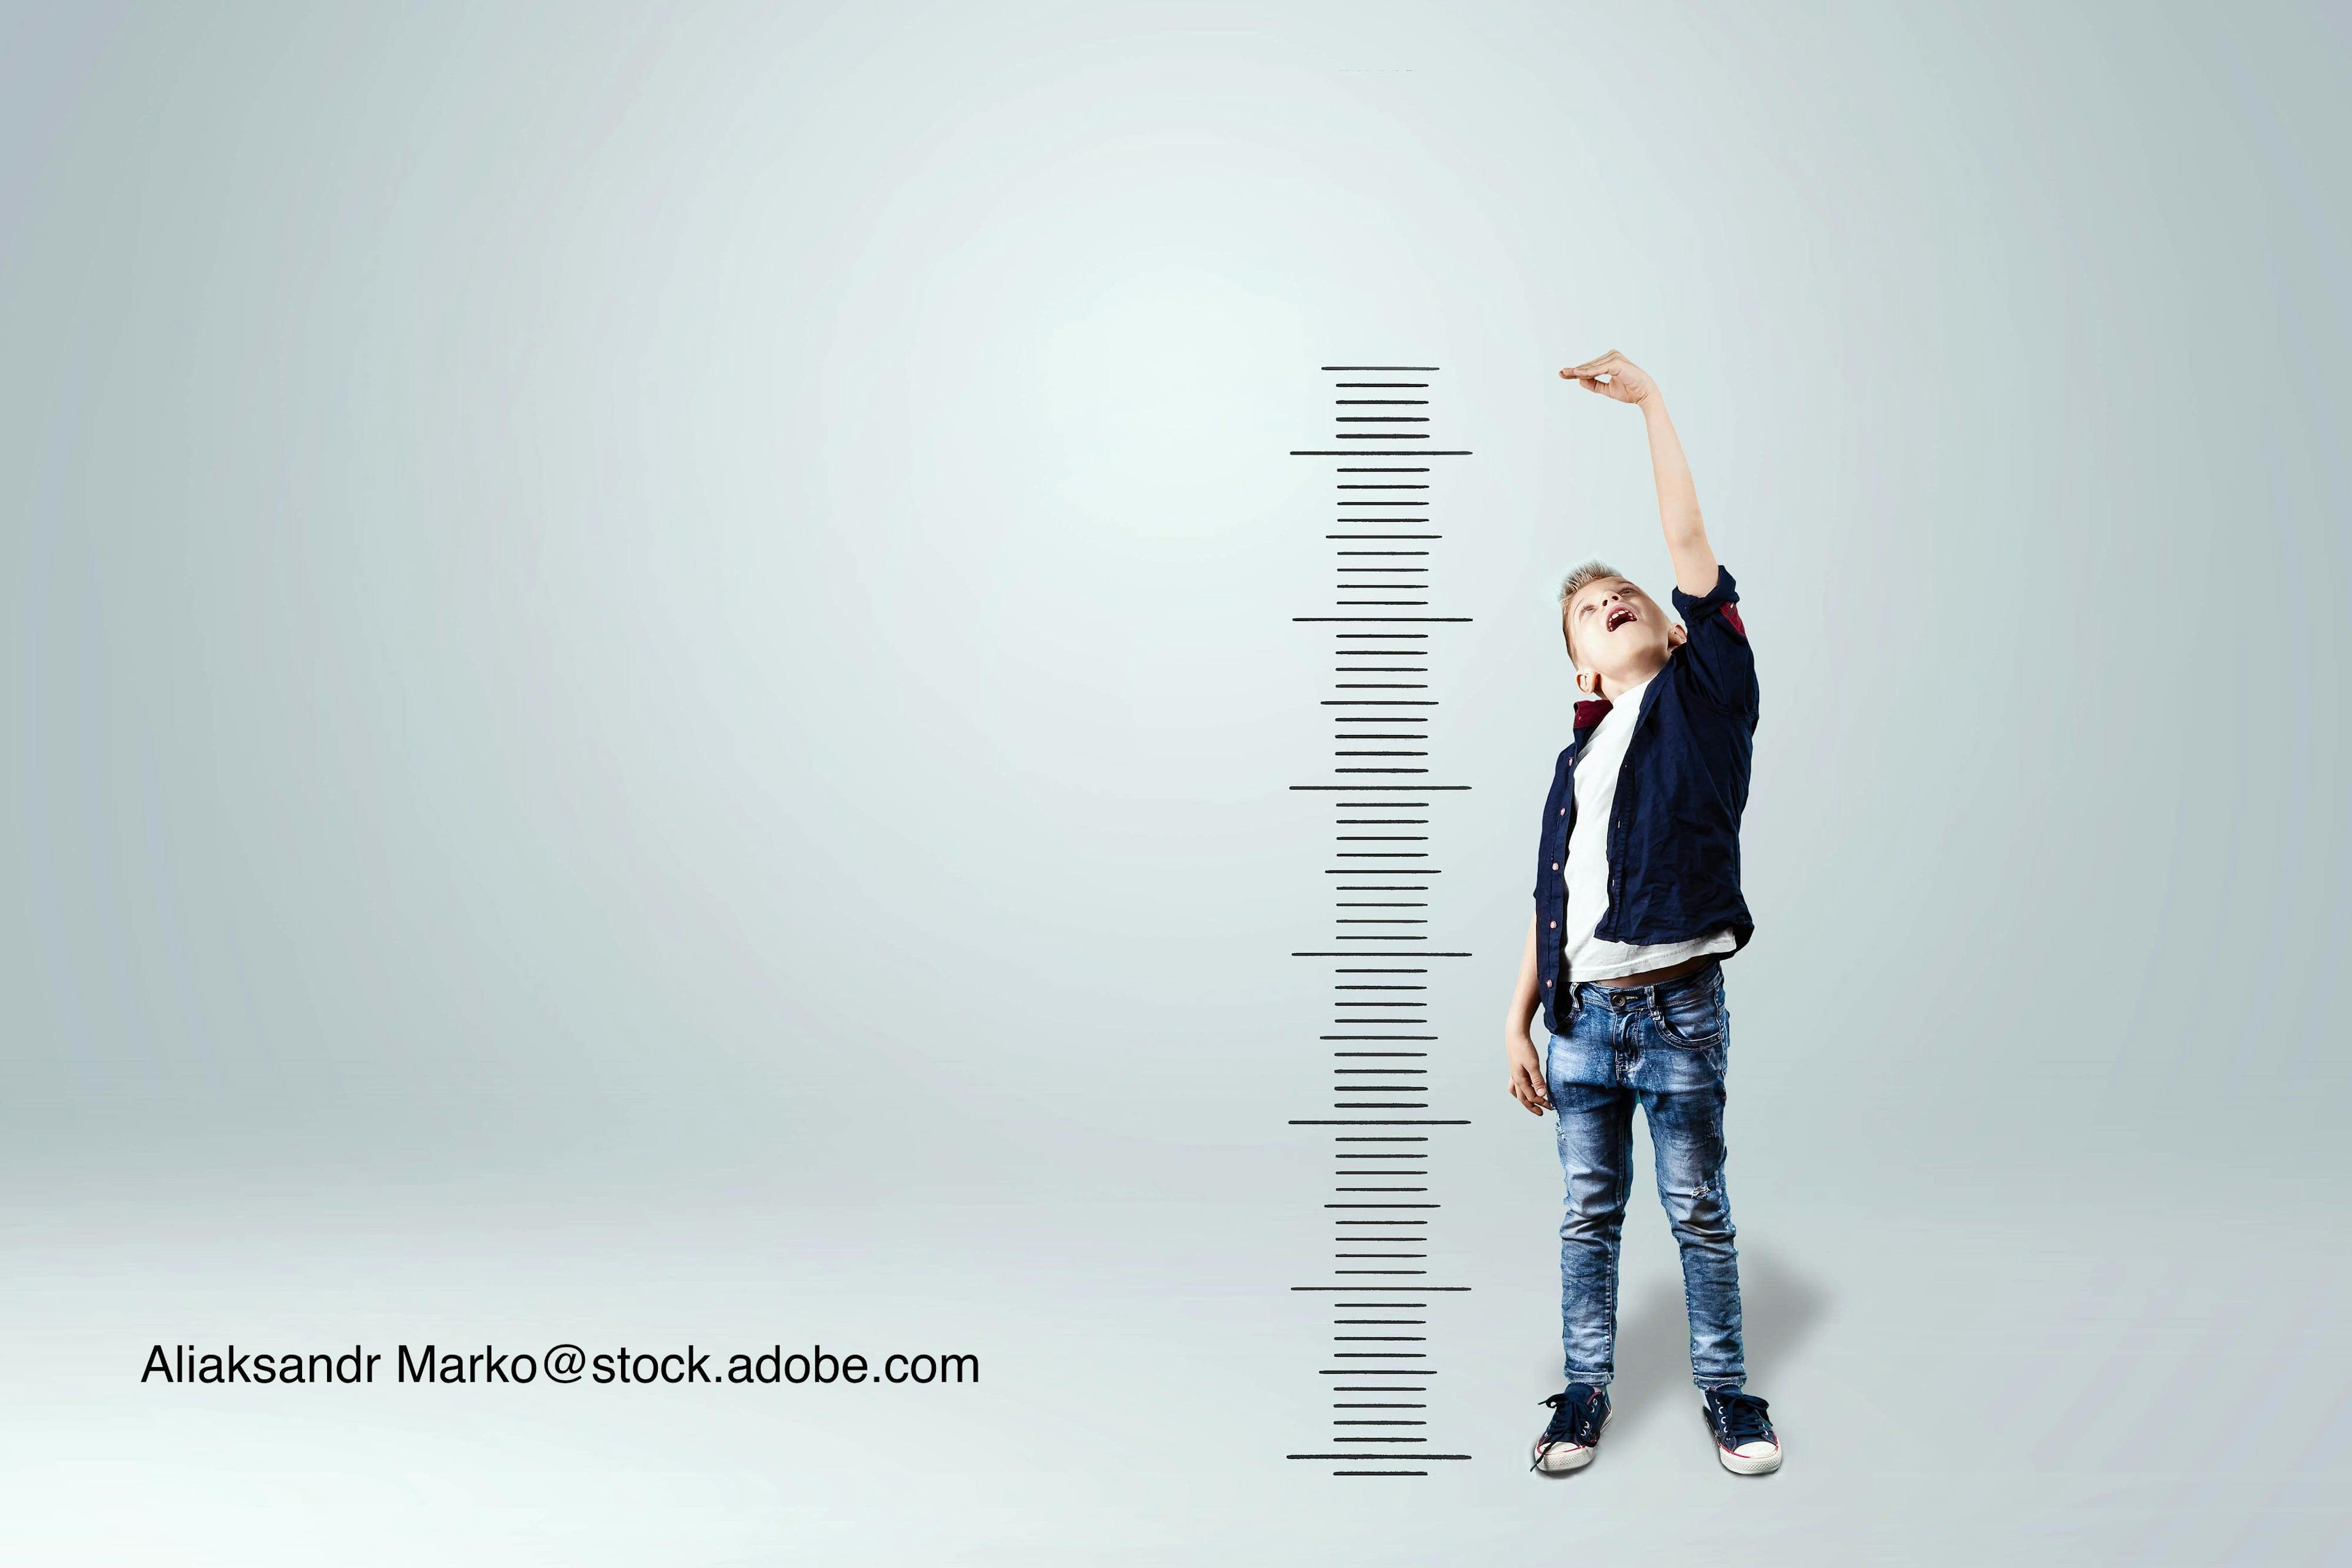 image of boy looking at a height chart